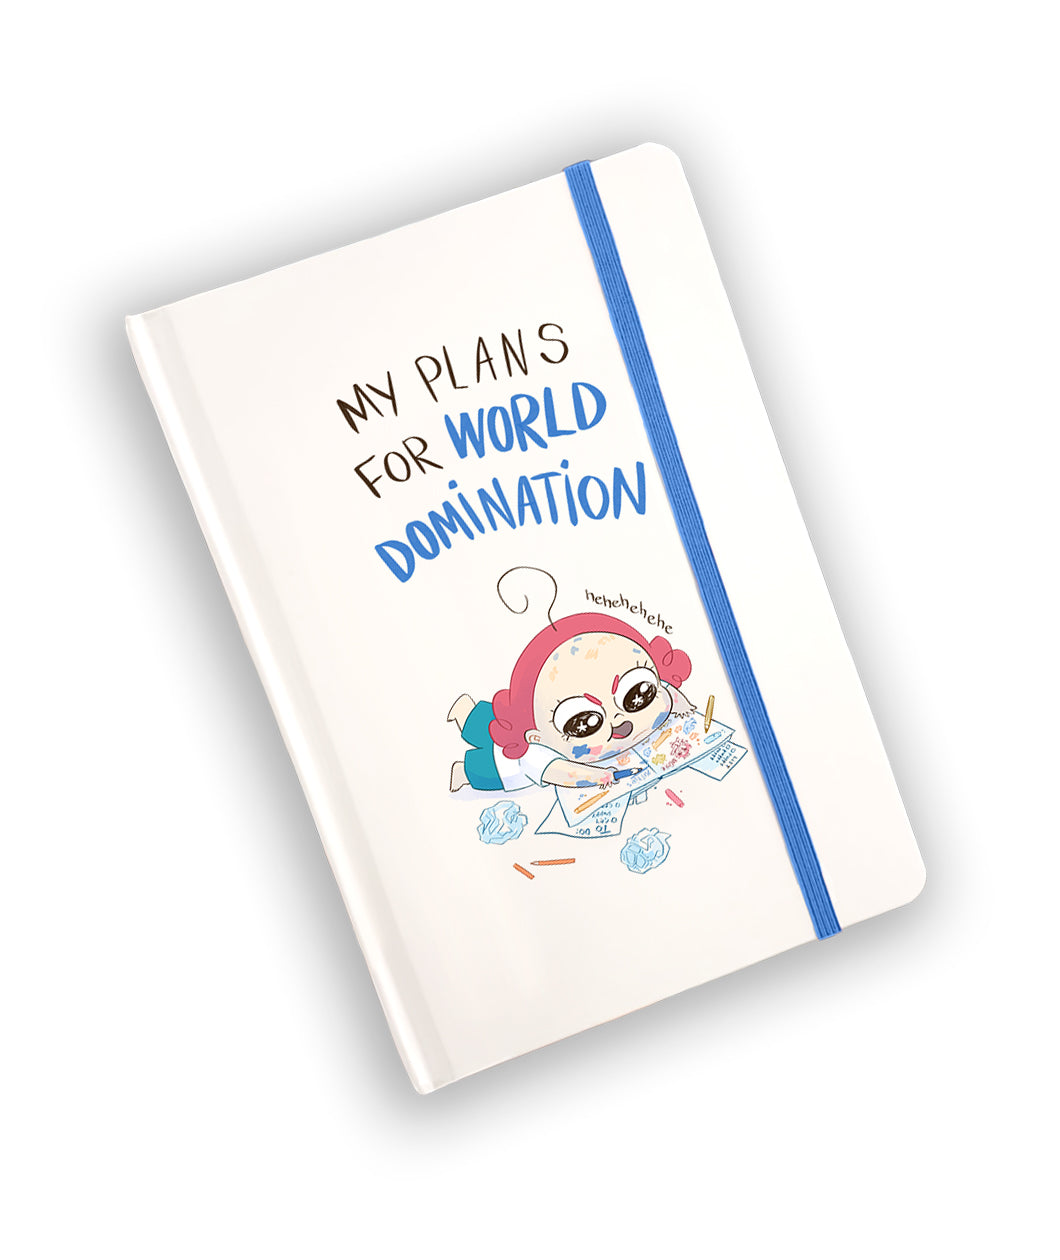 A white rectangular notebook with a blue elastic band holding it closed. The text "MY PLANS FOR WORLD DOMINATION" sit above an illustration of a child with a somewhat evil look in their face messily scribbling in their own notebook. By What's Up Beanie.